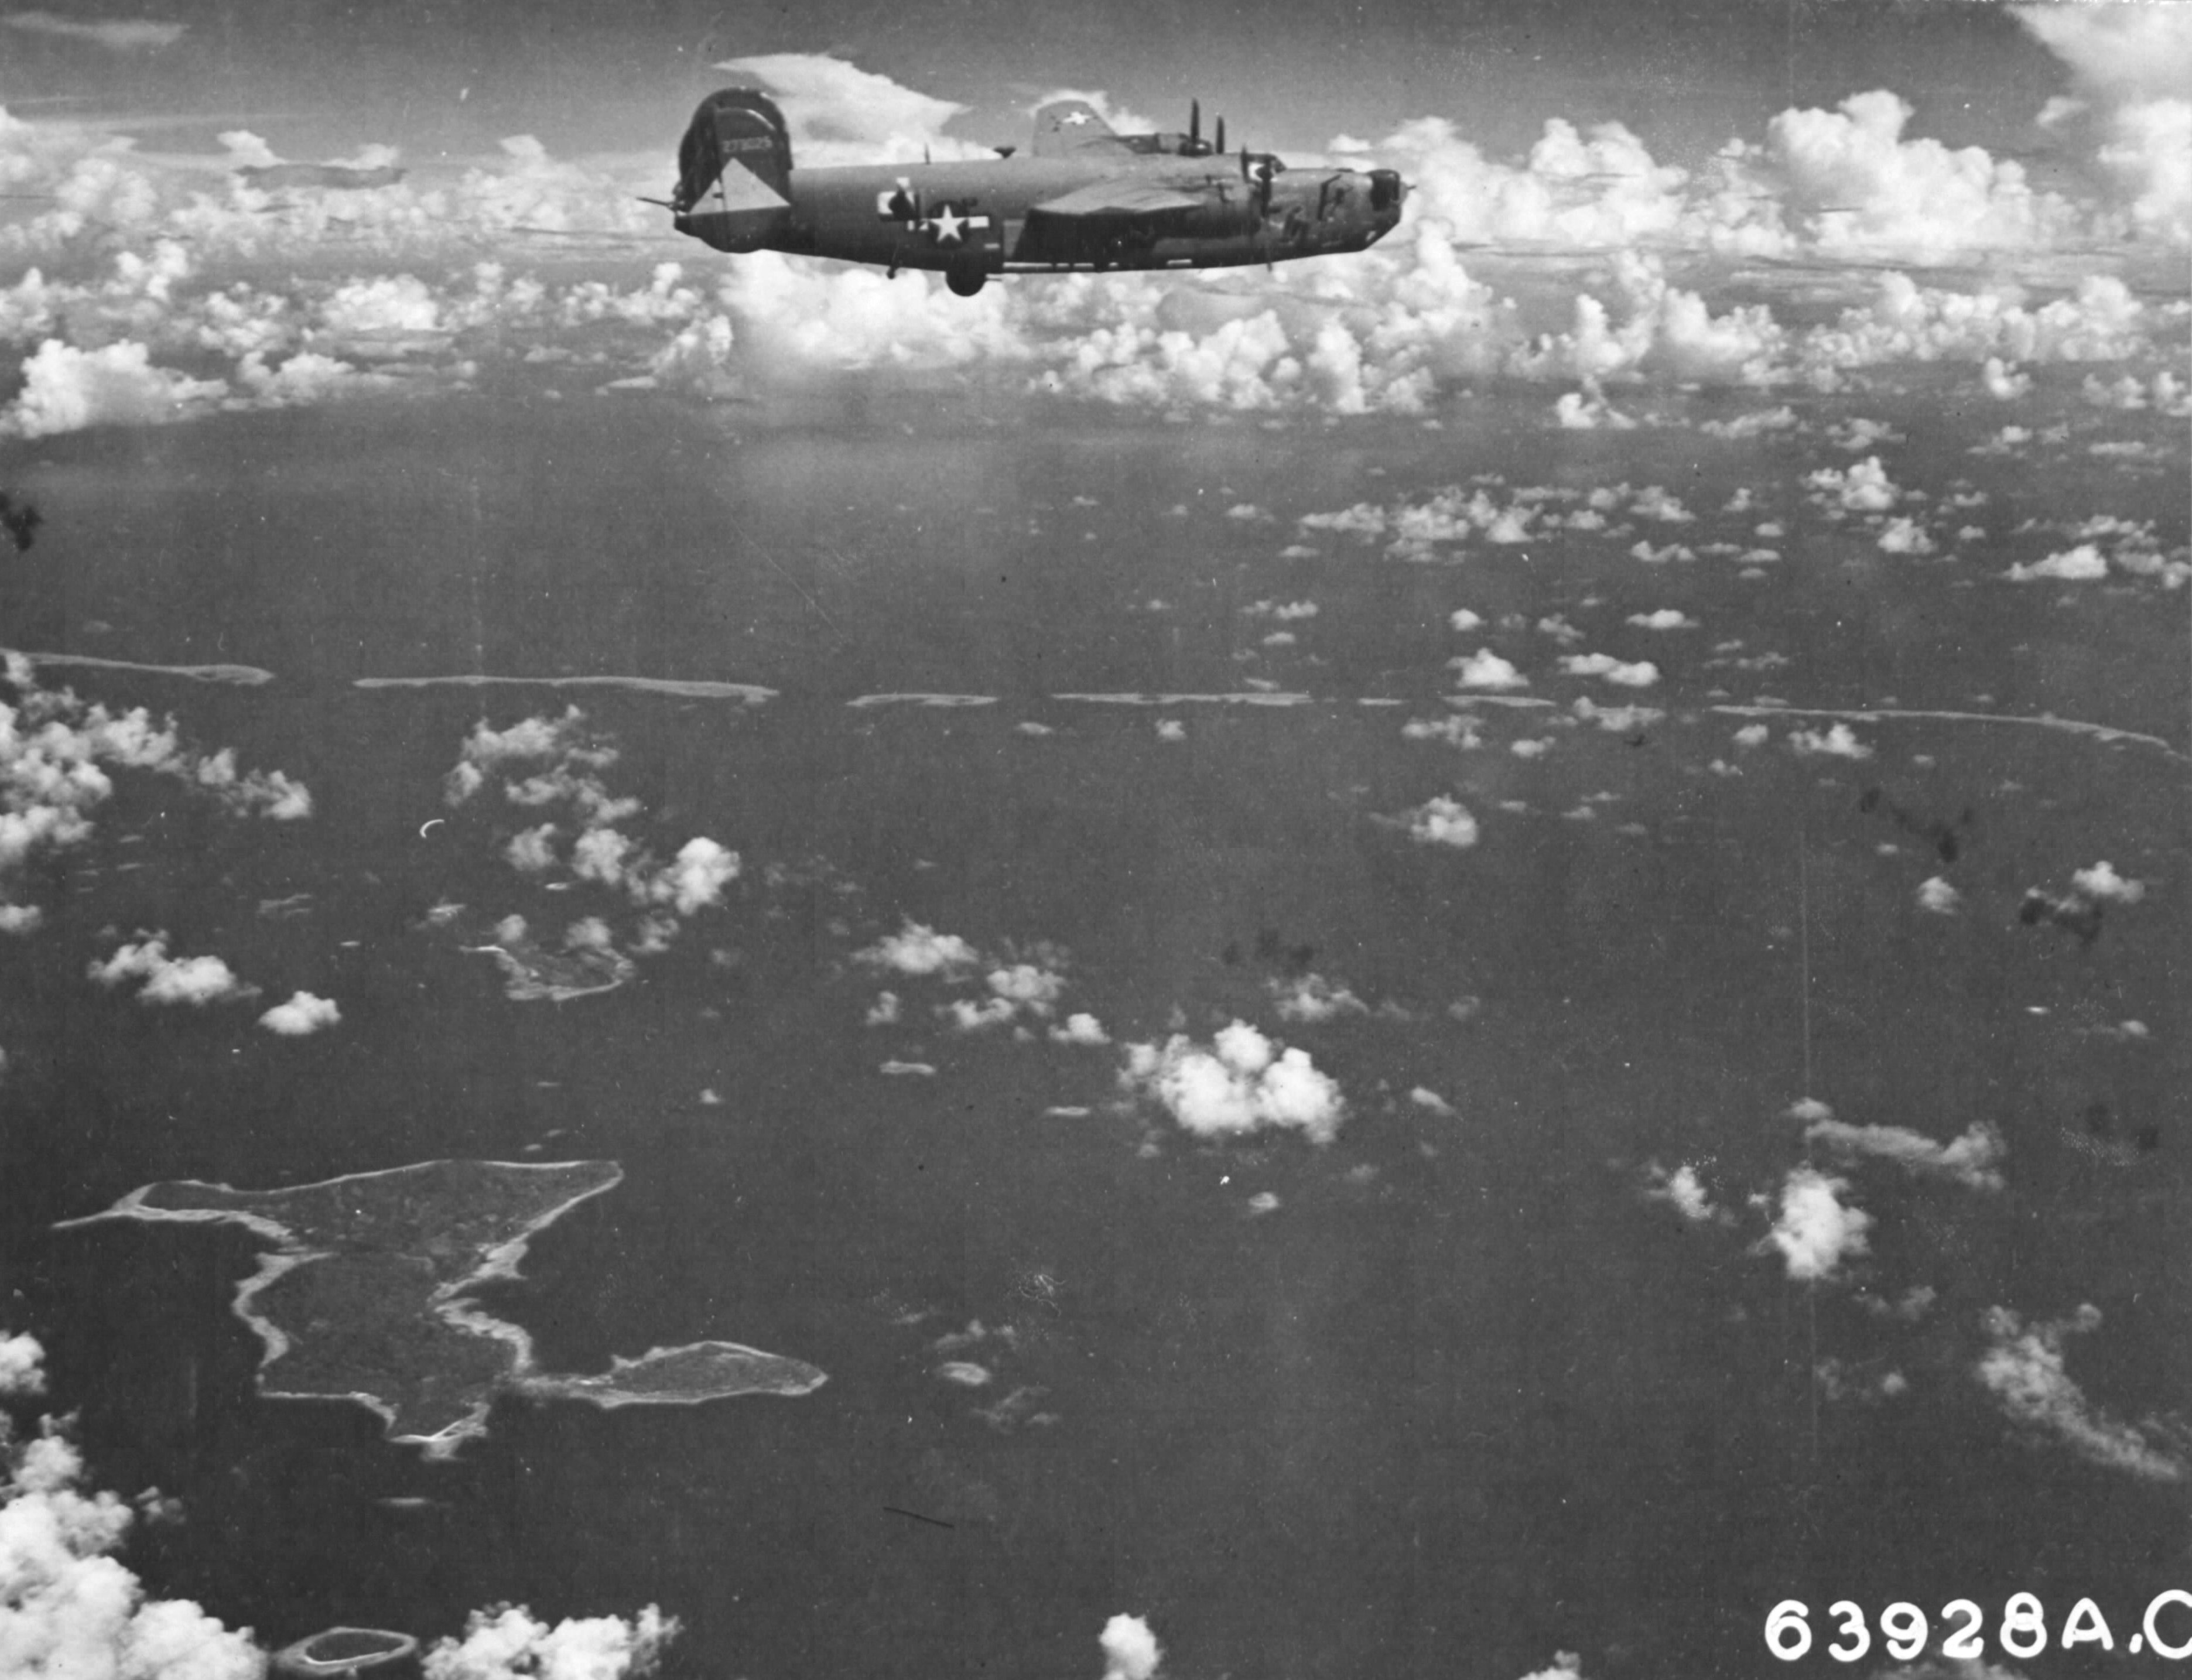 B-24J Liberator “Kansas Cyclone” of the 26th Bomb Squadron approaching targets in and around the Truk Lagoon, Caroline Islands, 1944. Note Udot Island below.